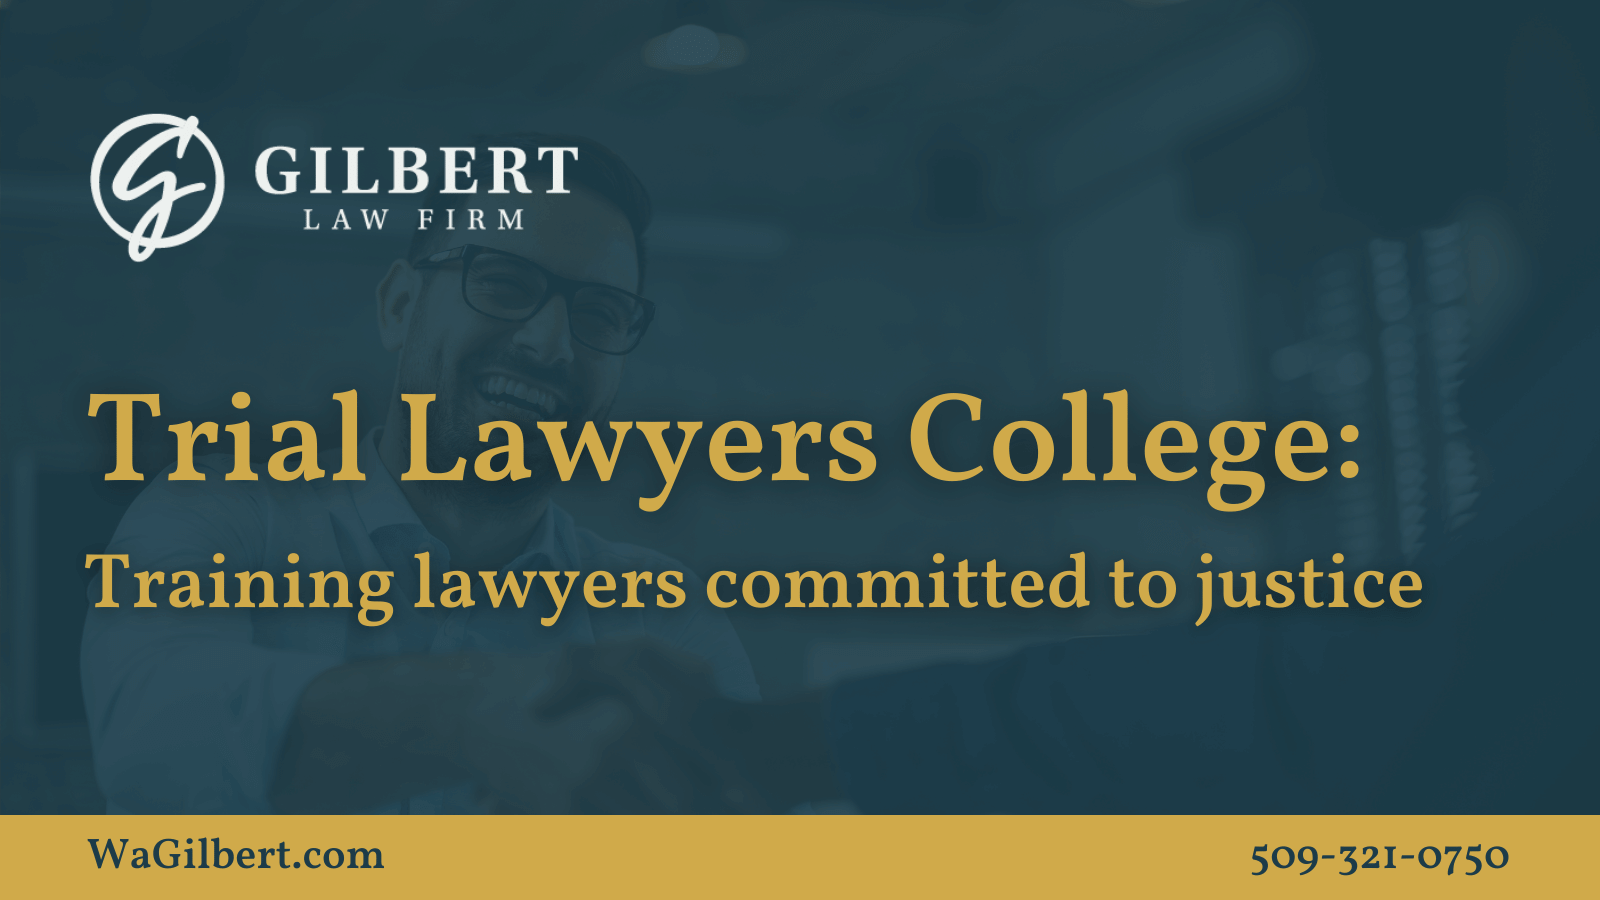 Trial Lawyers CollegeTraining lawyers committed to justice - Gilbert Law Firm Spokane Washington